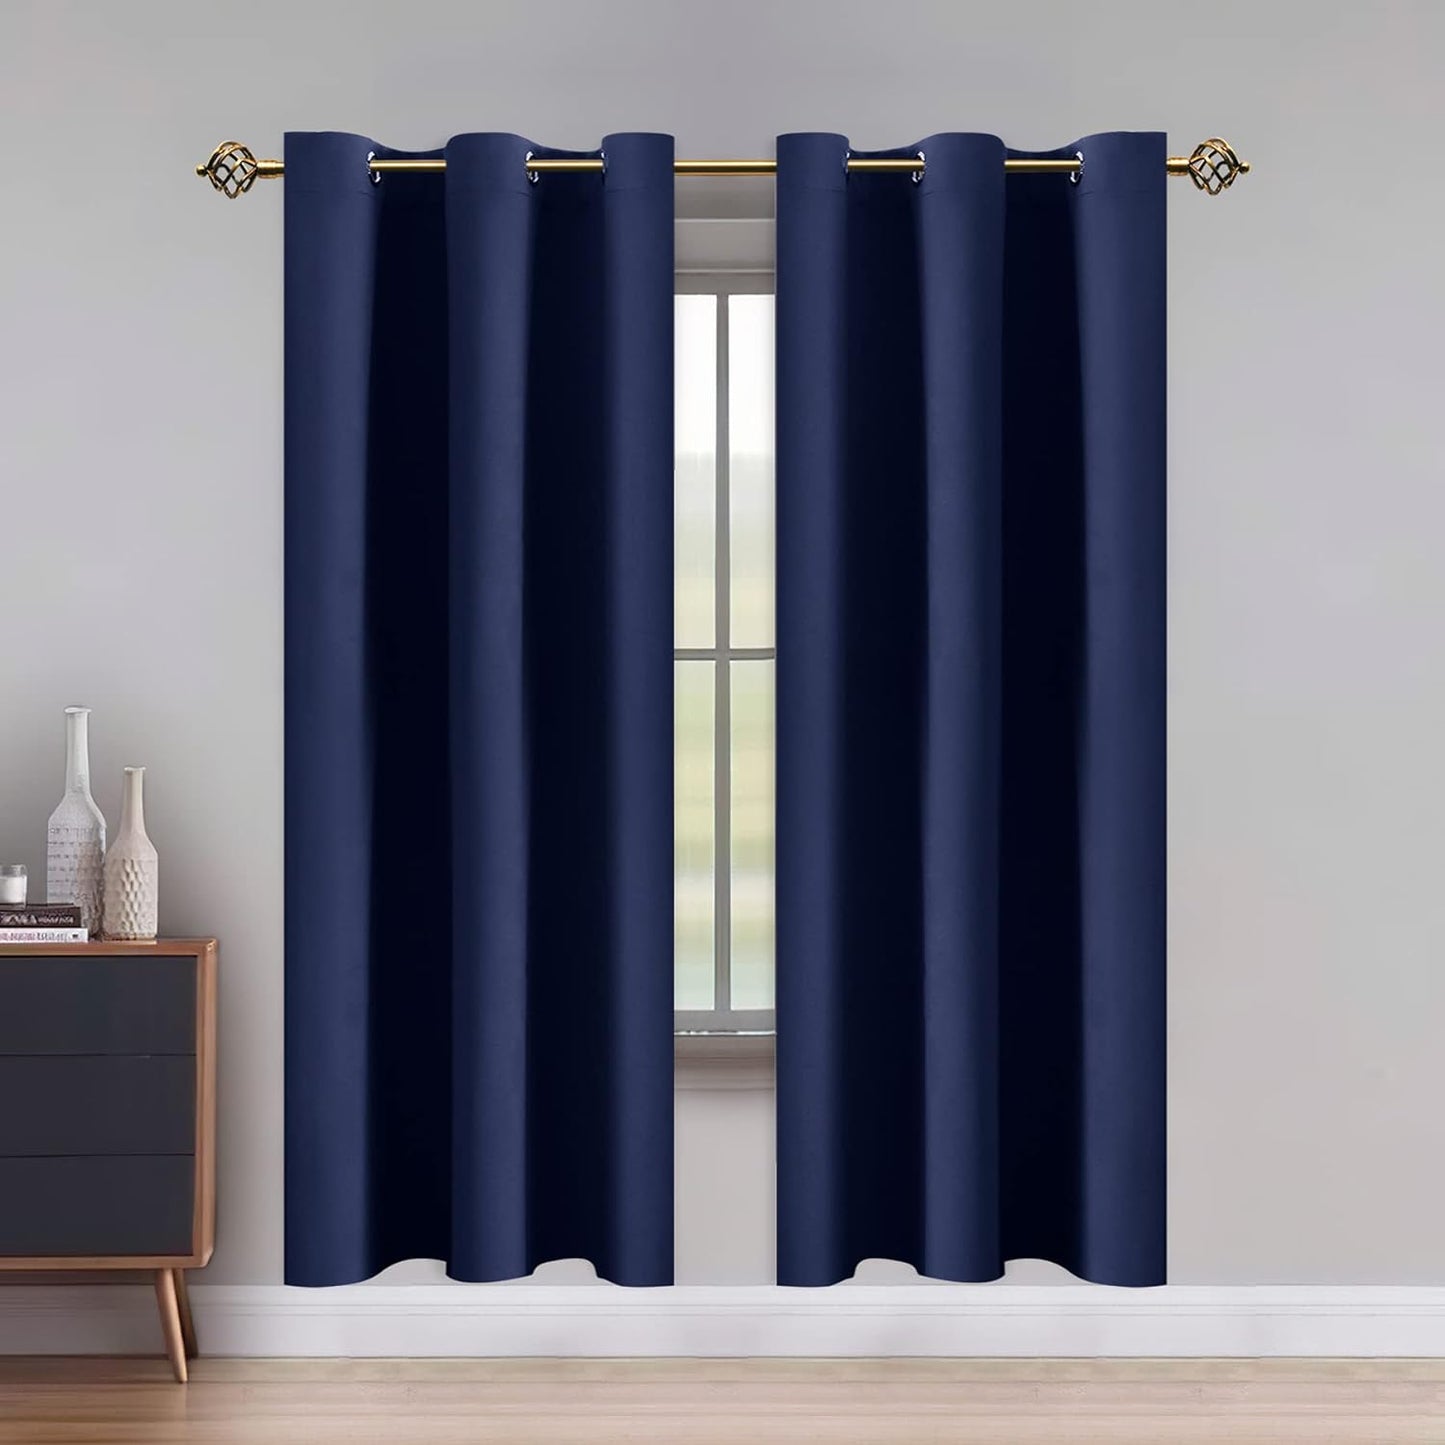 LUSHLEAF Blackout Curtains for Bedroom, Solid Thermal Insulated with Grommet Noise Reduction Window Drapes, Room Darkening Curtains for Living Room, 2 Panels, 52 X 63 Inch Grey  SHEEROOM Navy 42 X 84 Inch 